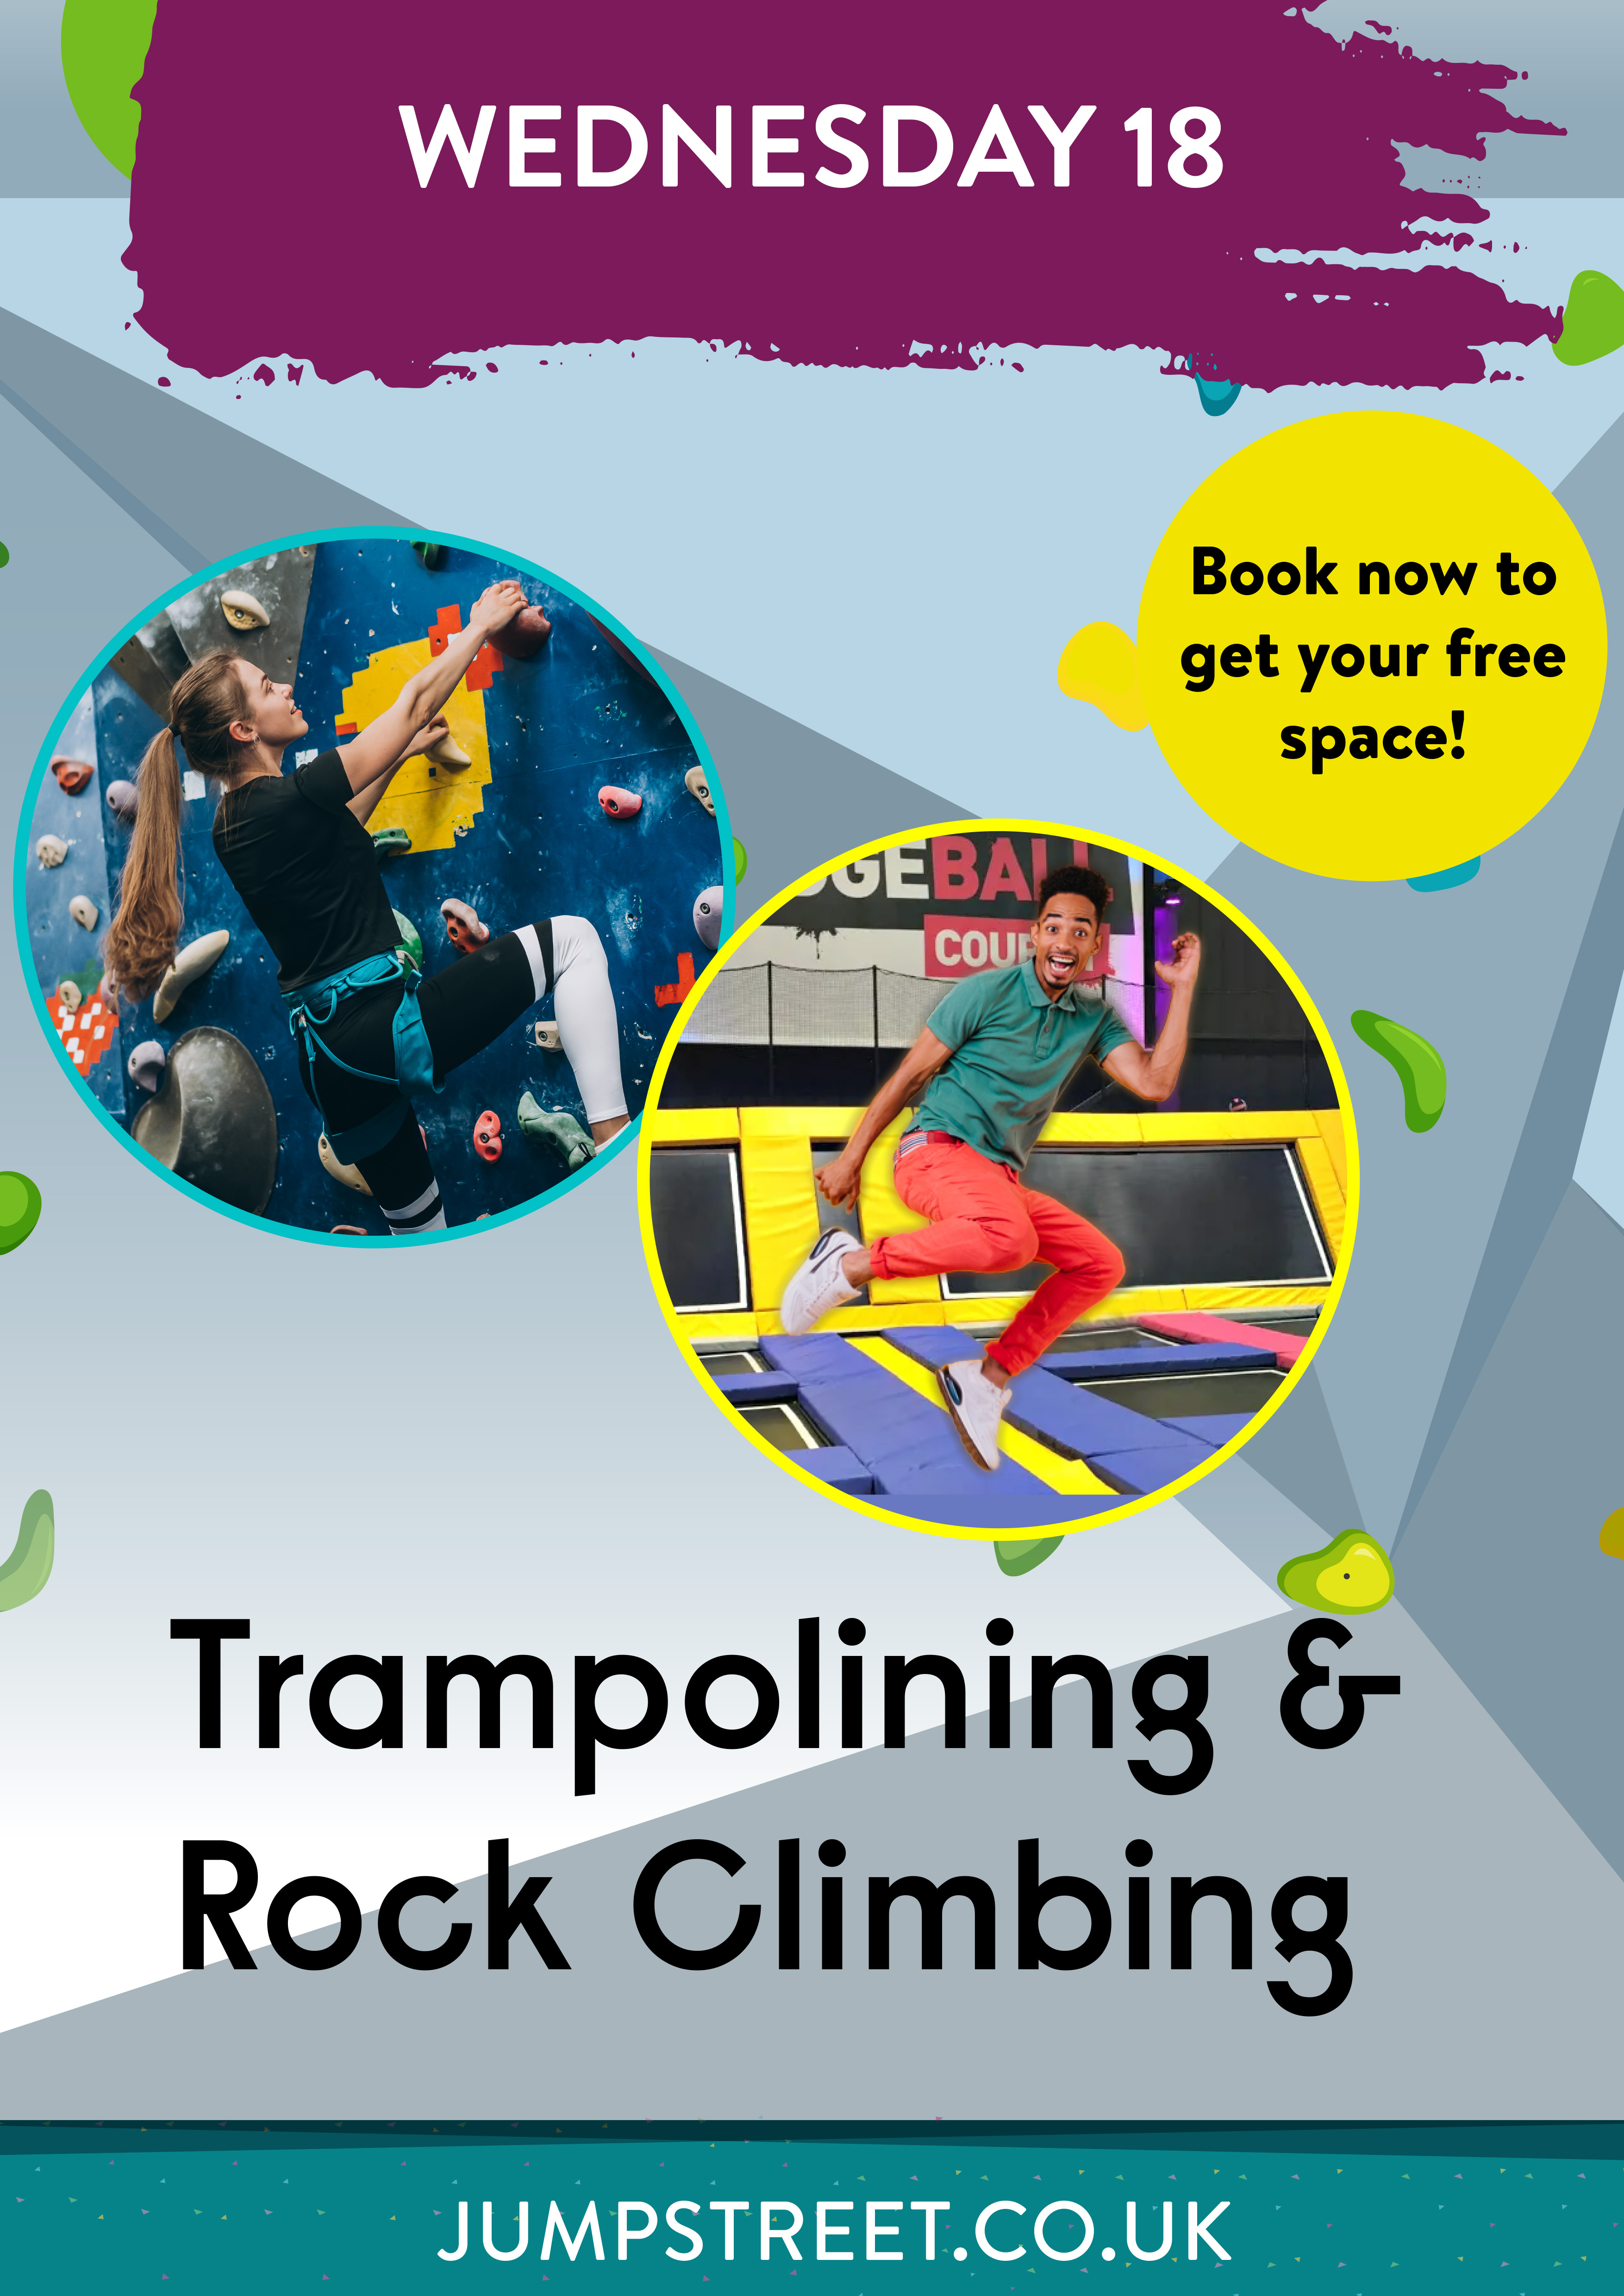 Wednesady 18 January. Trampolining and Rock Climbing. Book now to get your free space!